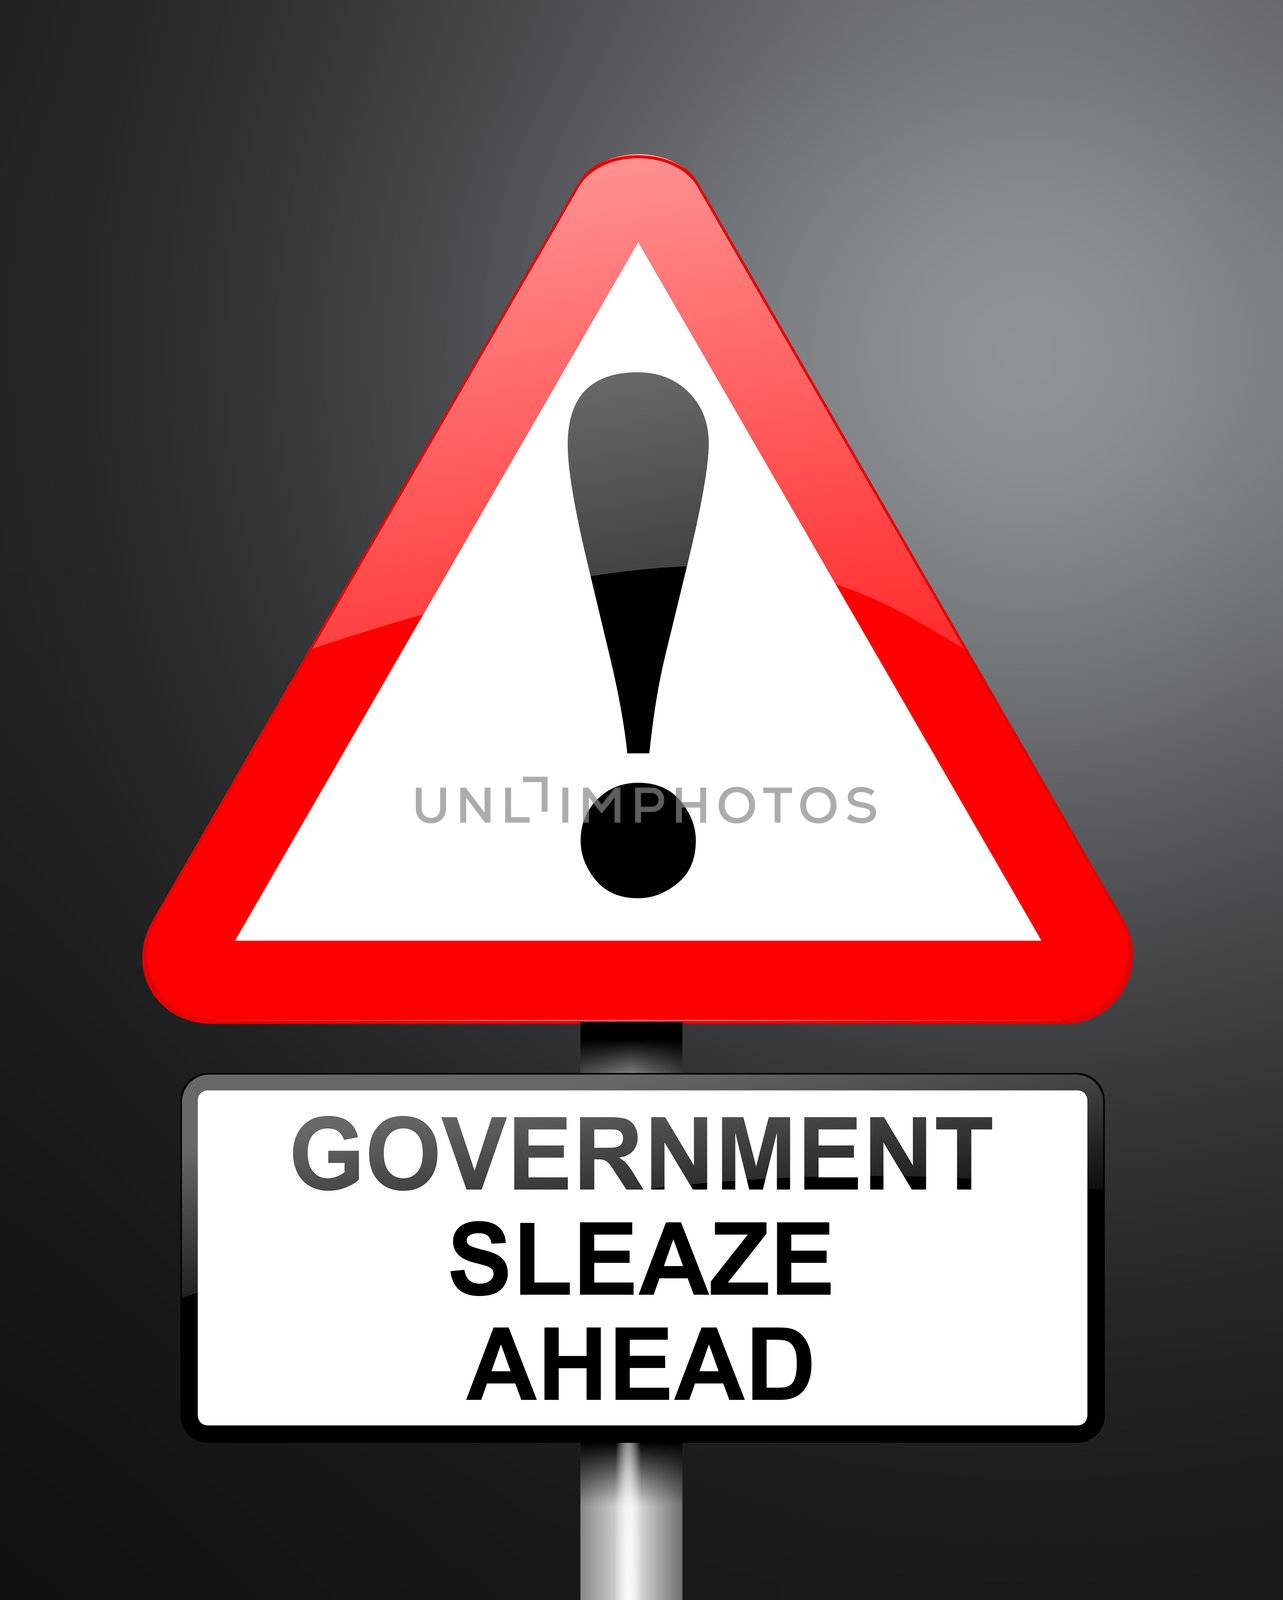 Illustration depicting red and white triangular warning road sign with a government sleaze concept. Dark background.